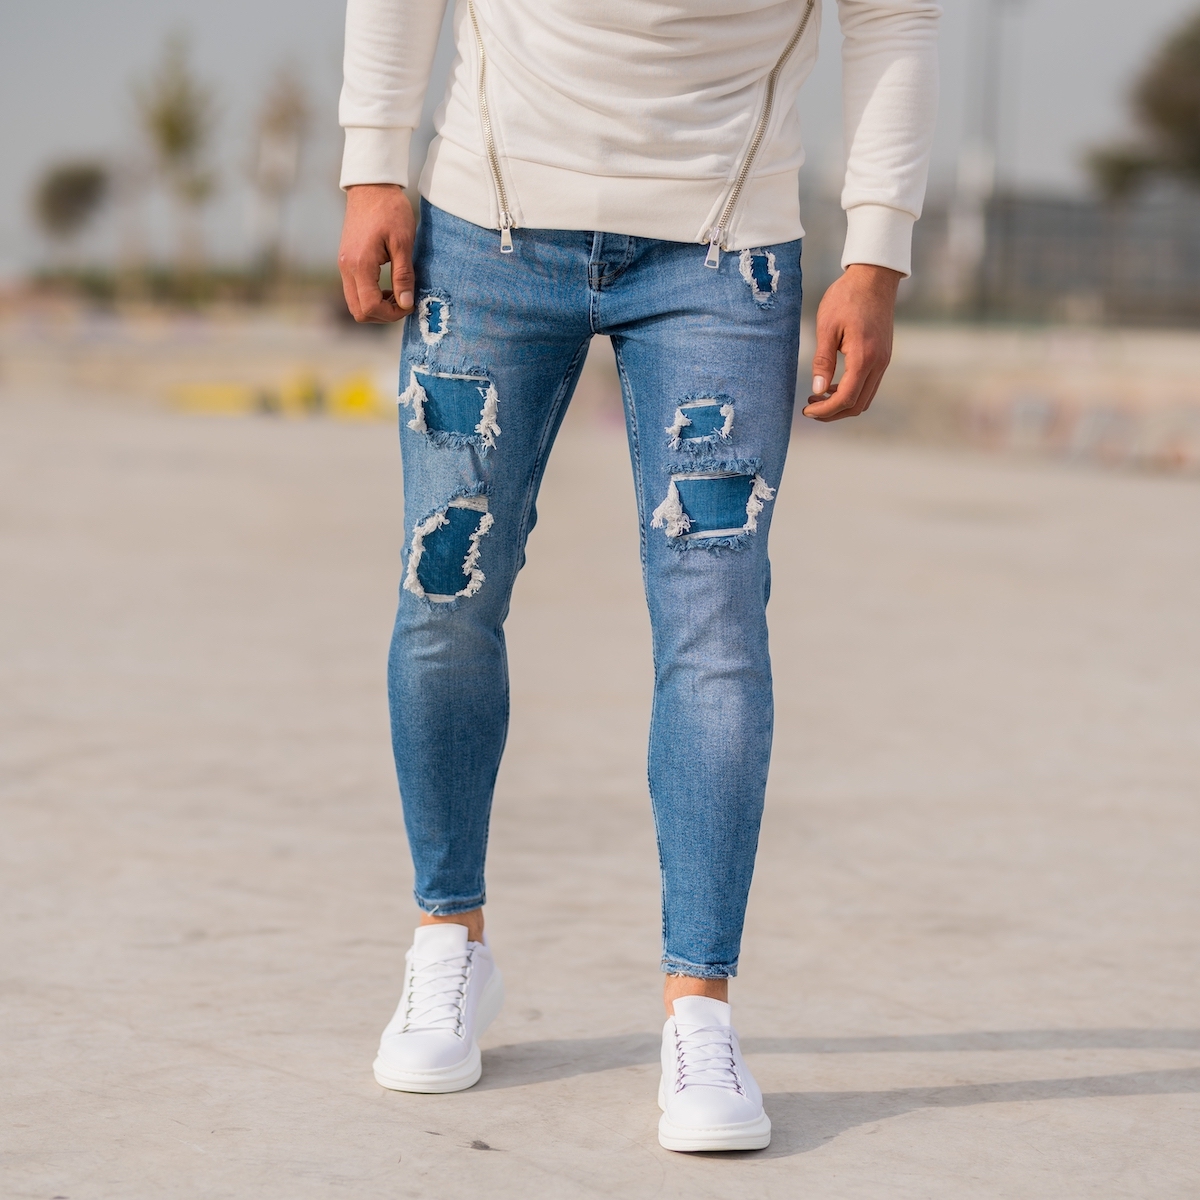 Men's Distorted Patch Jeans